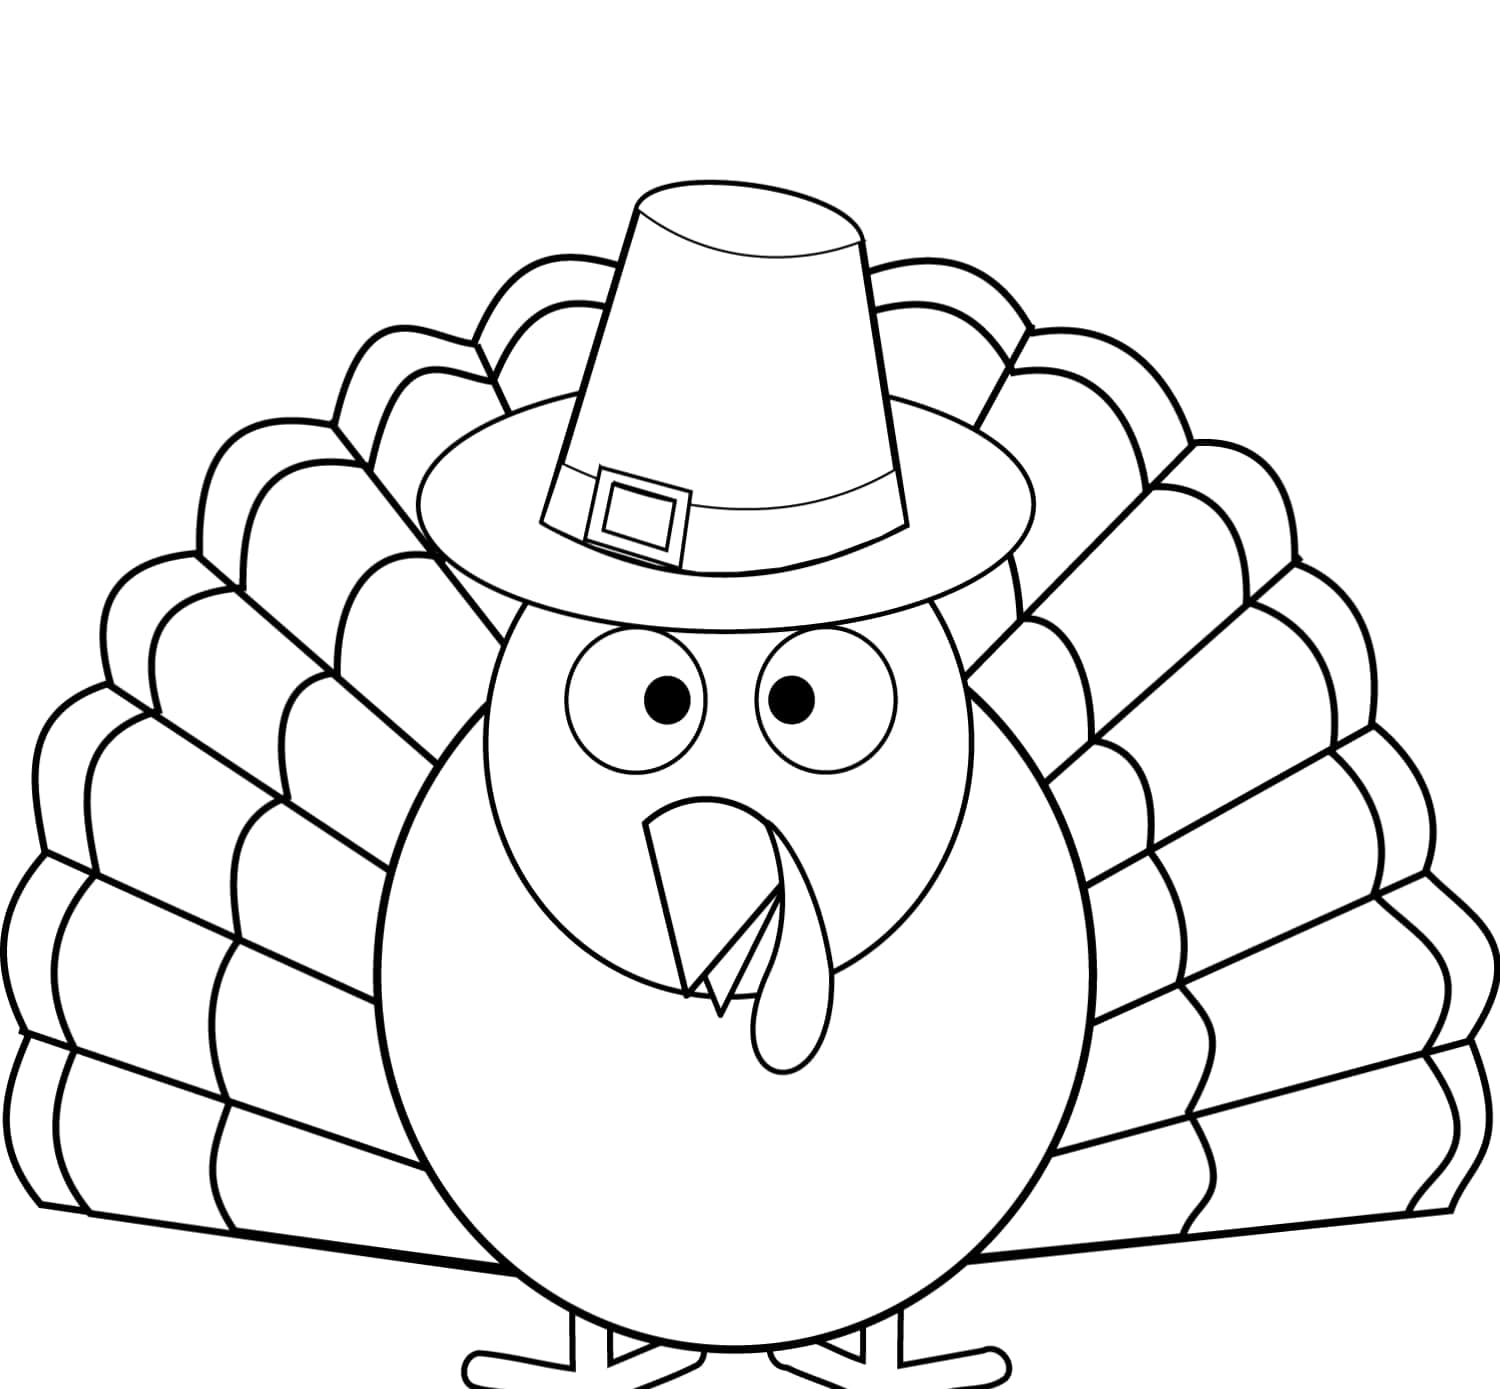 Color This Picture of a Turkey